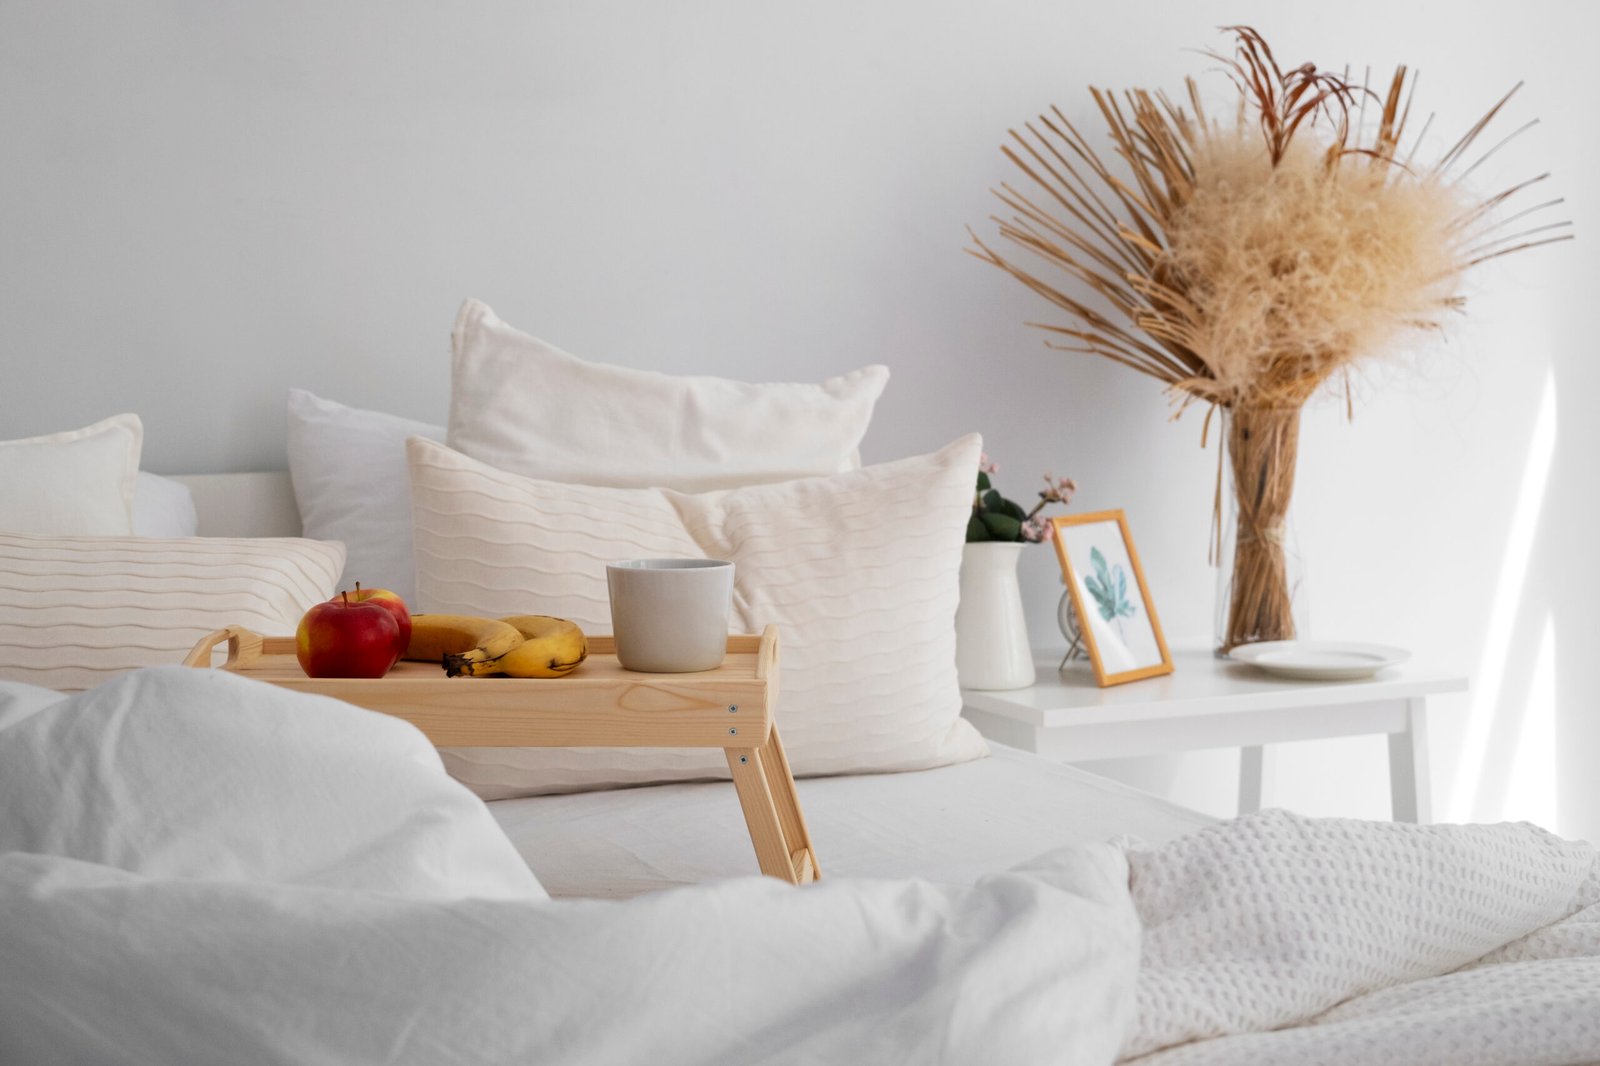 Bed arrangement with fresh bed sheets and a breakfast tray.